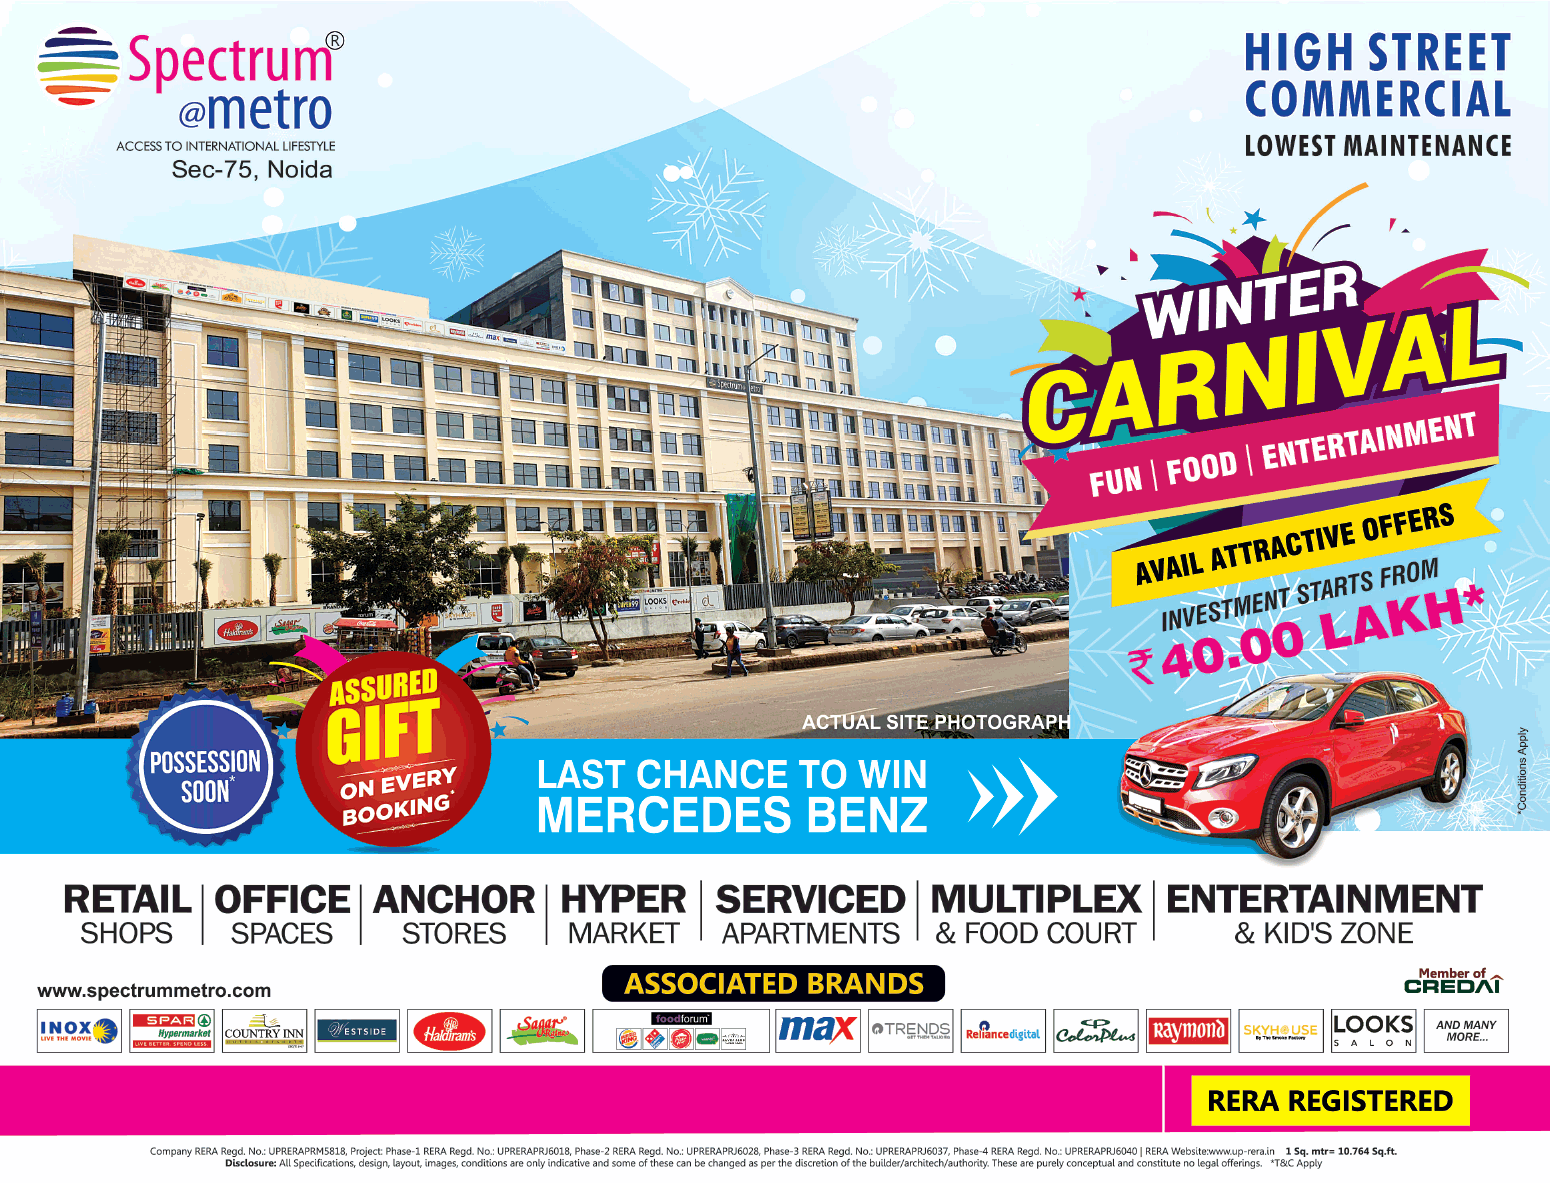 Last chance to win Mercedes-Benz at Blue Spectrum Metro in Noida